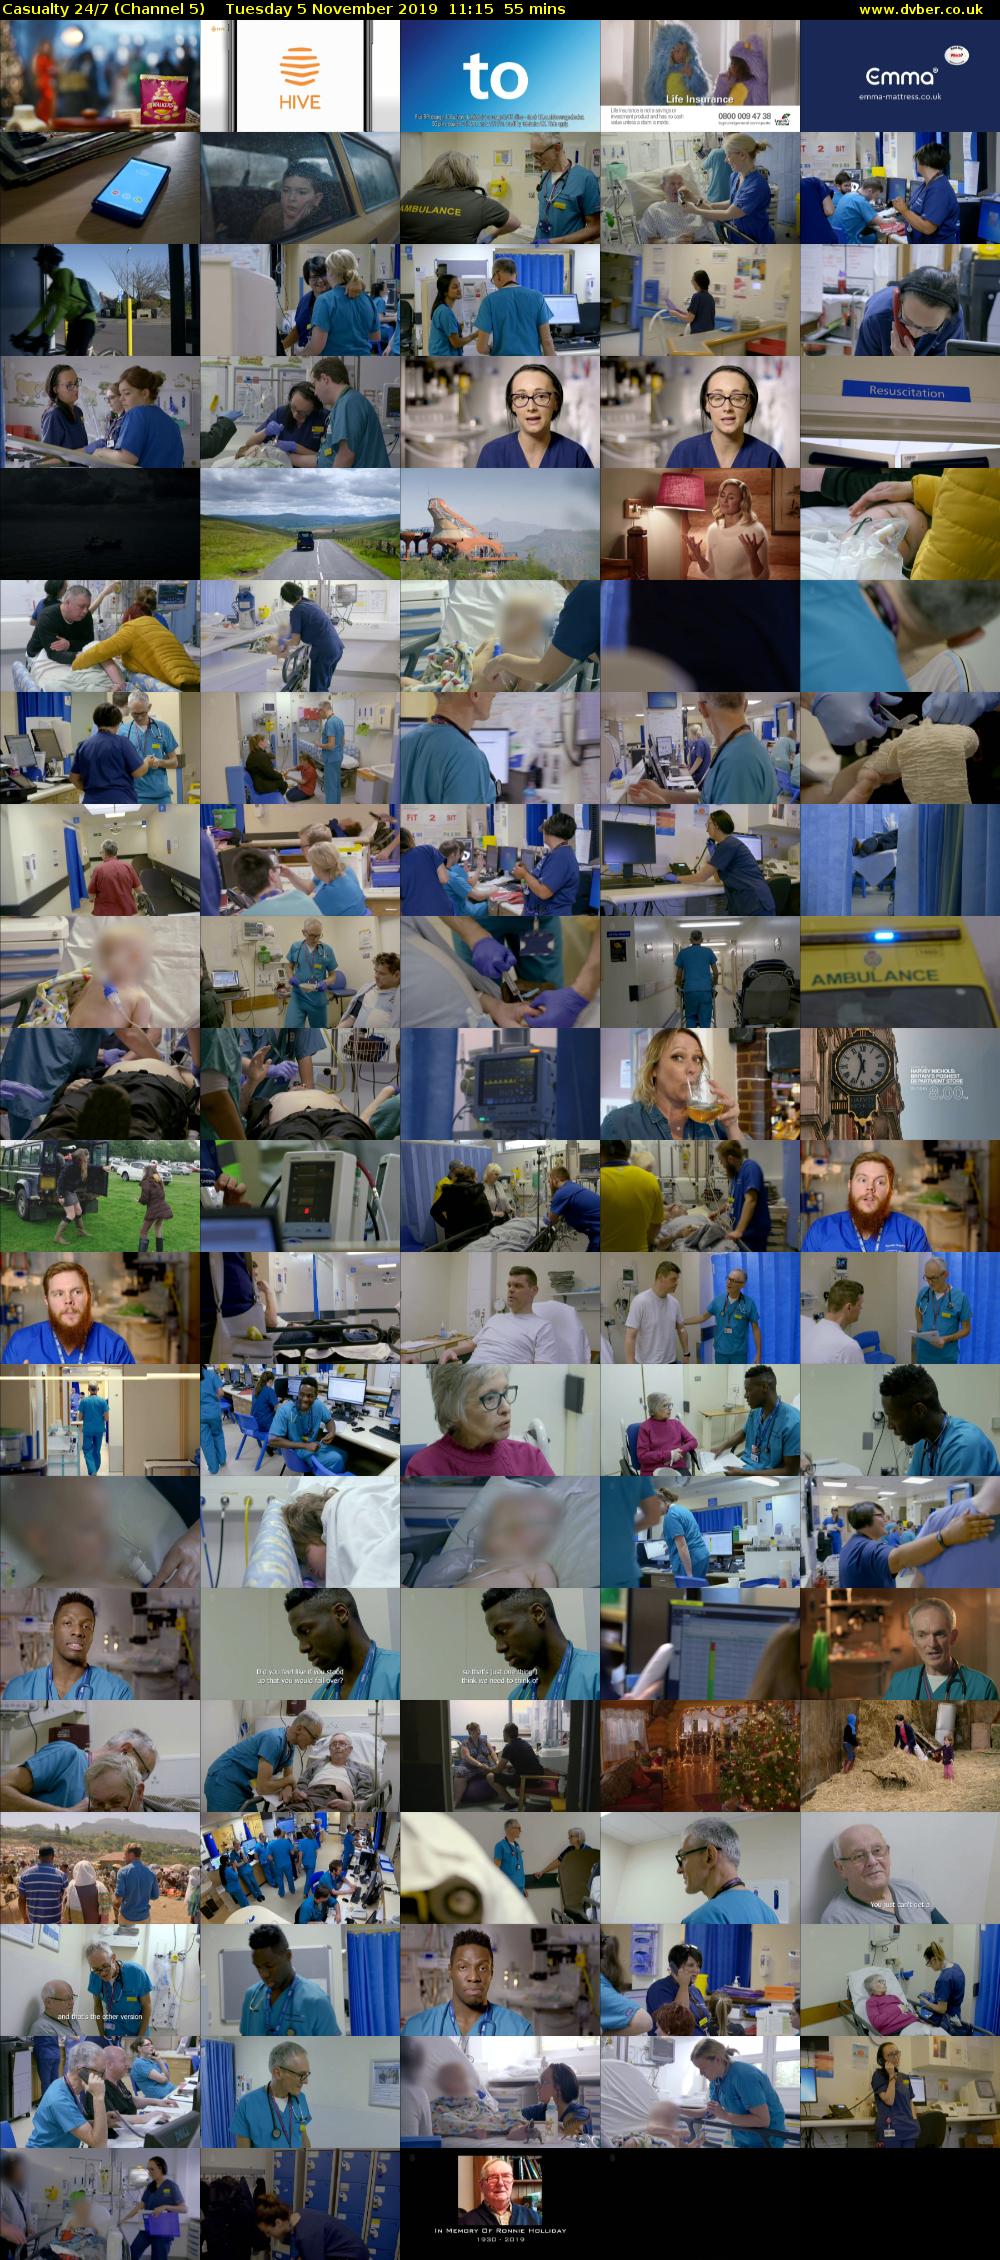 Casualty 24/7 (Channel 5) Tuesday 5 November 2019 11:15 - 12:10